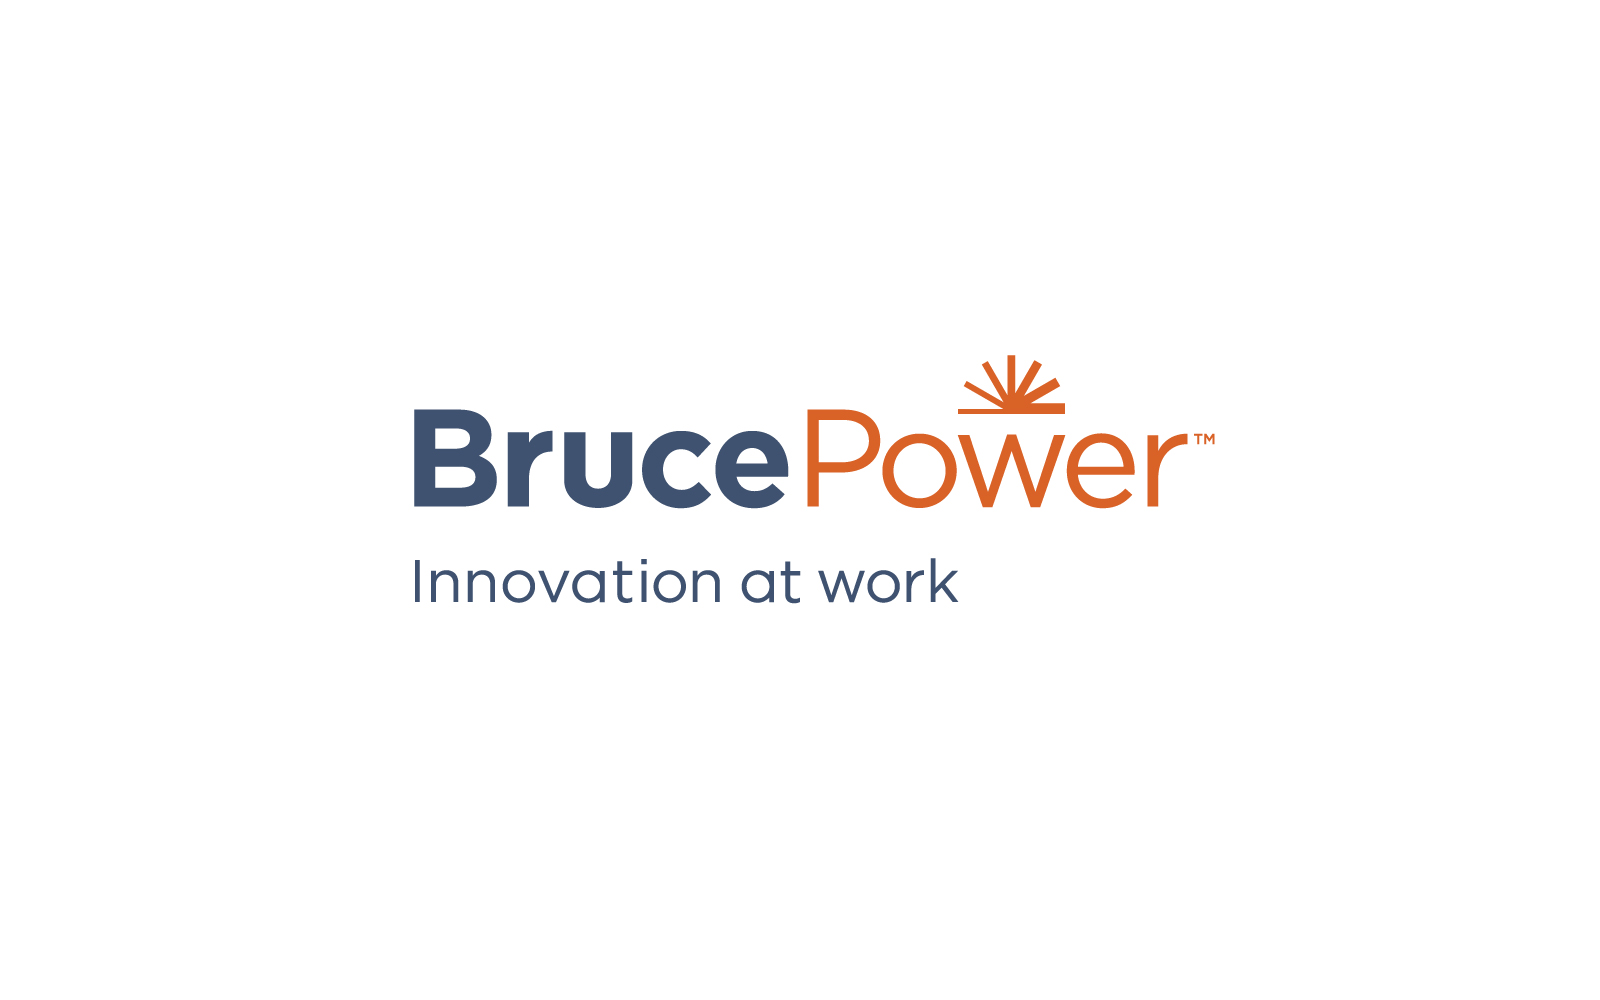 bruce power announces hydrogen production plans for counties in clean energy frontier